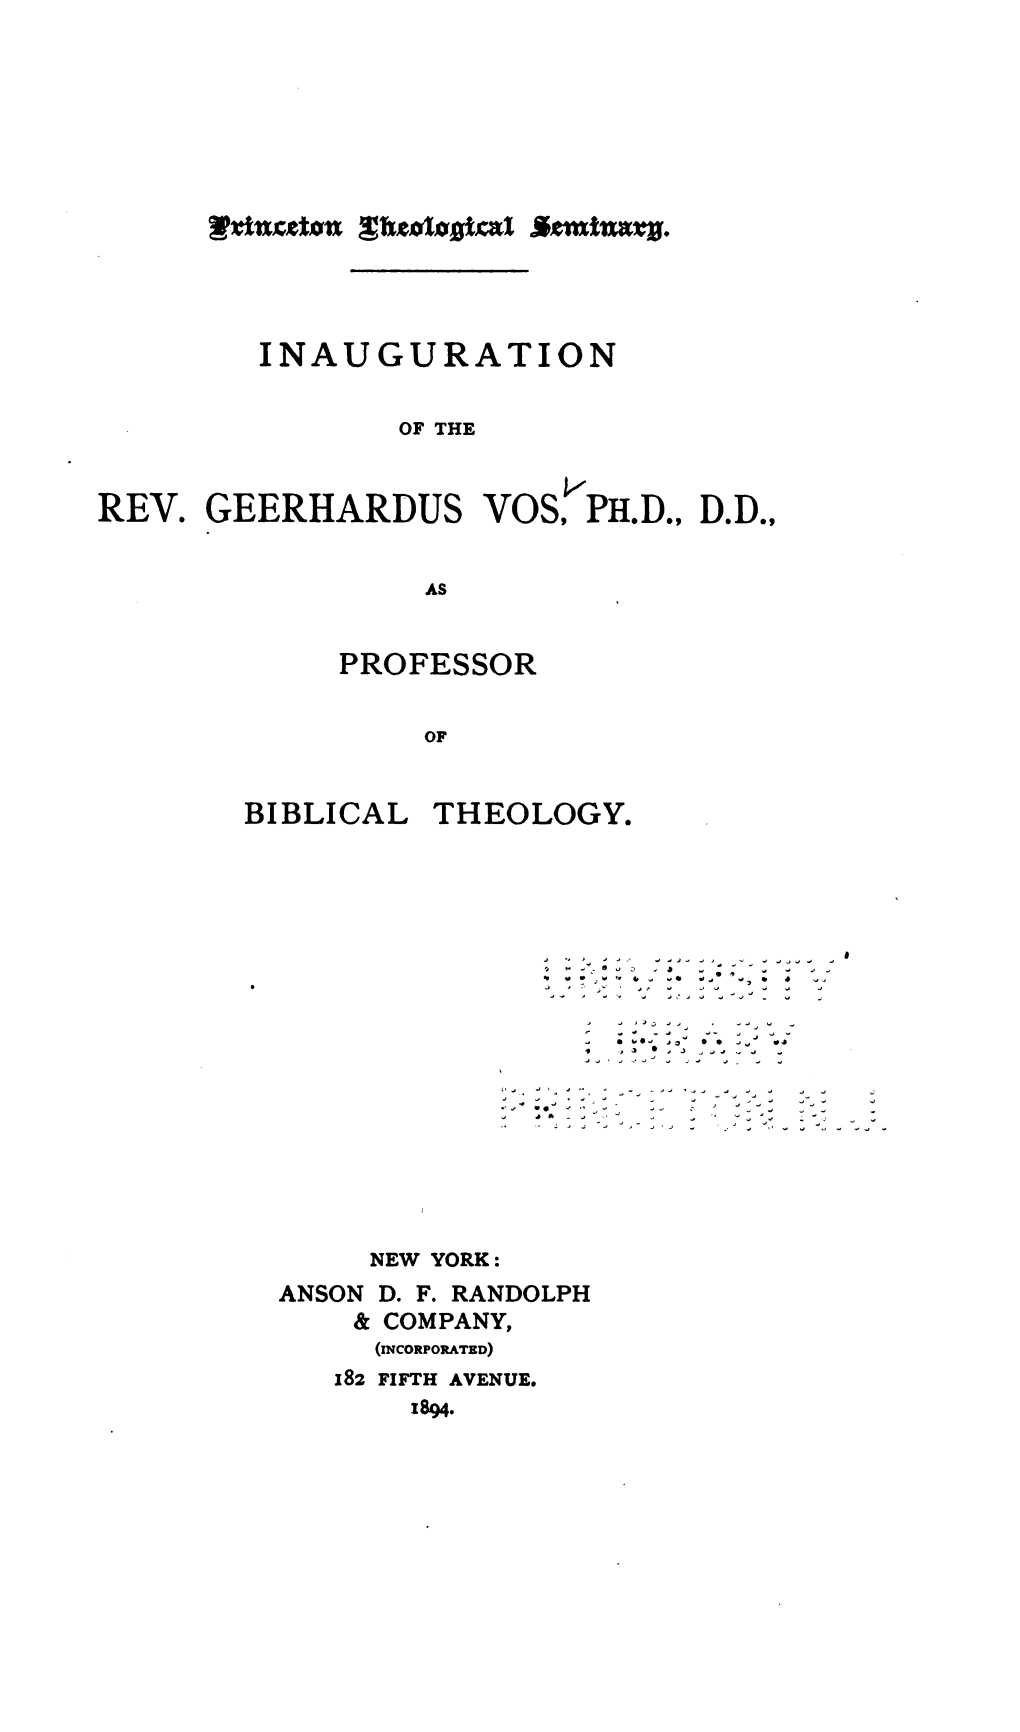 Inauguration of the Rev. Geerhardus Vos As Professor of Biblical Theology